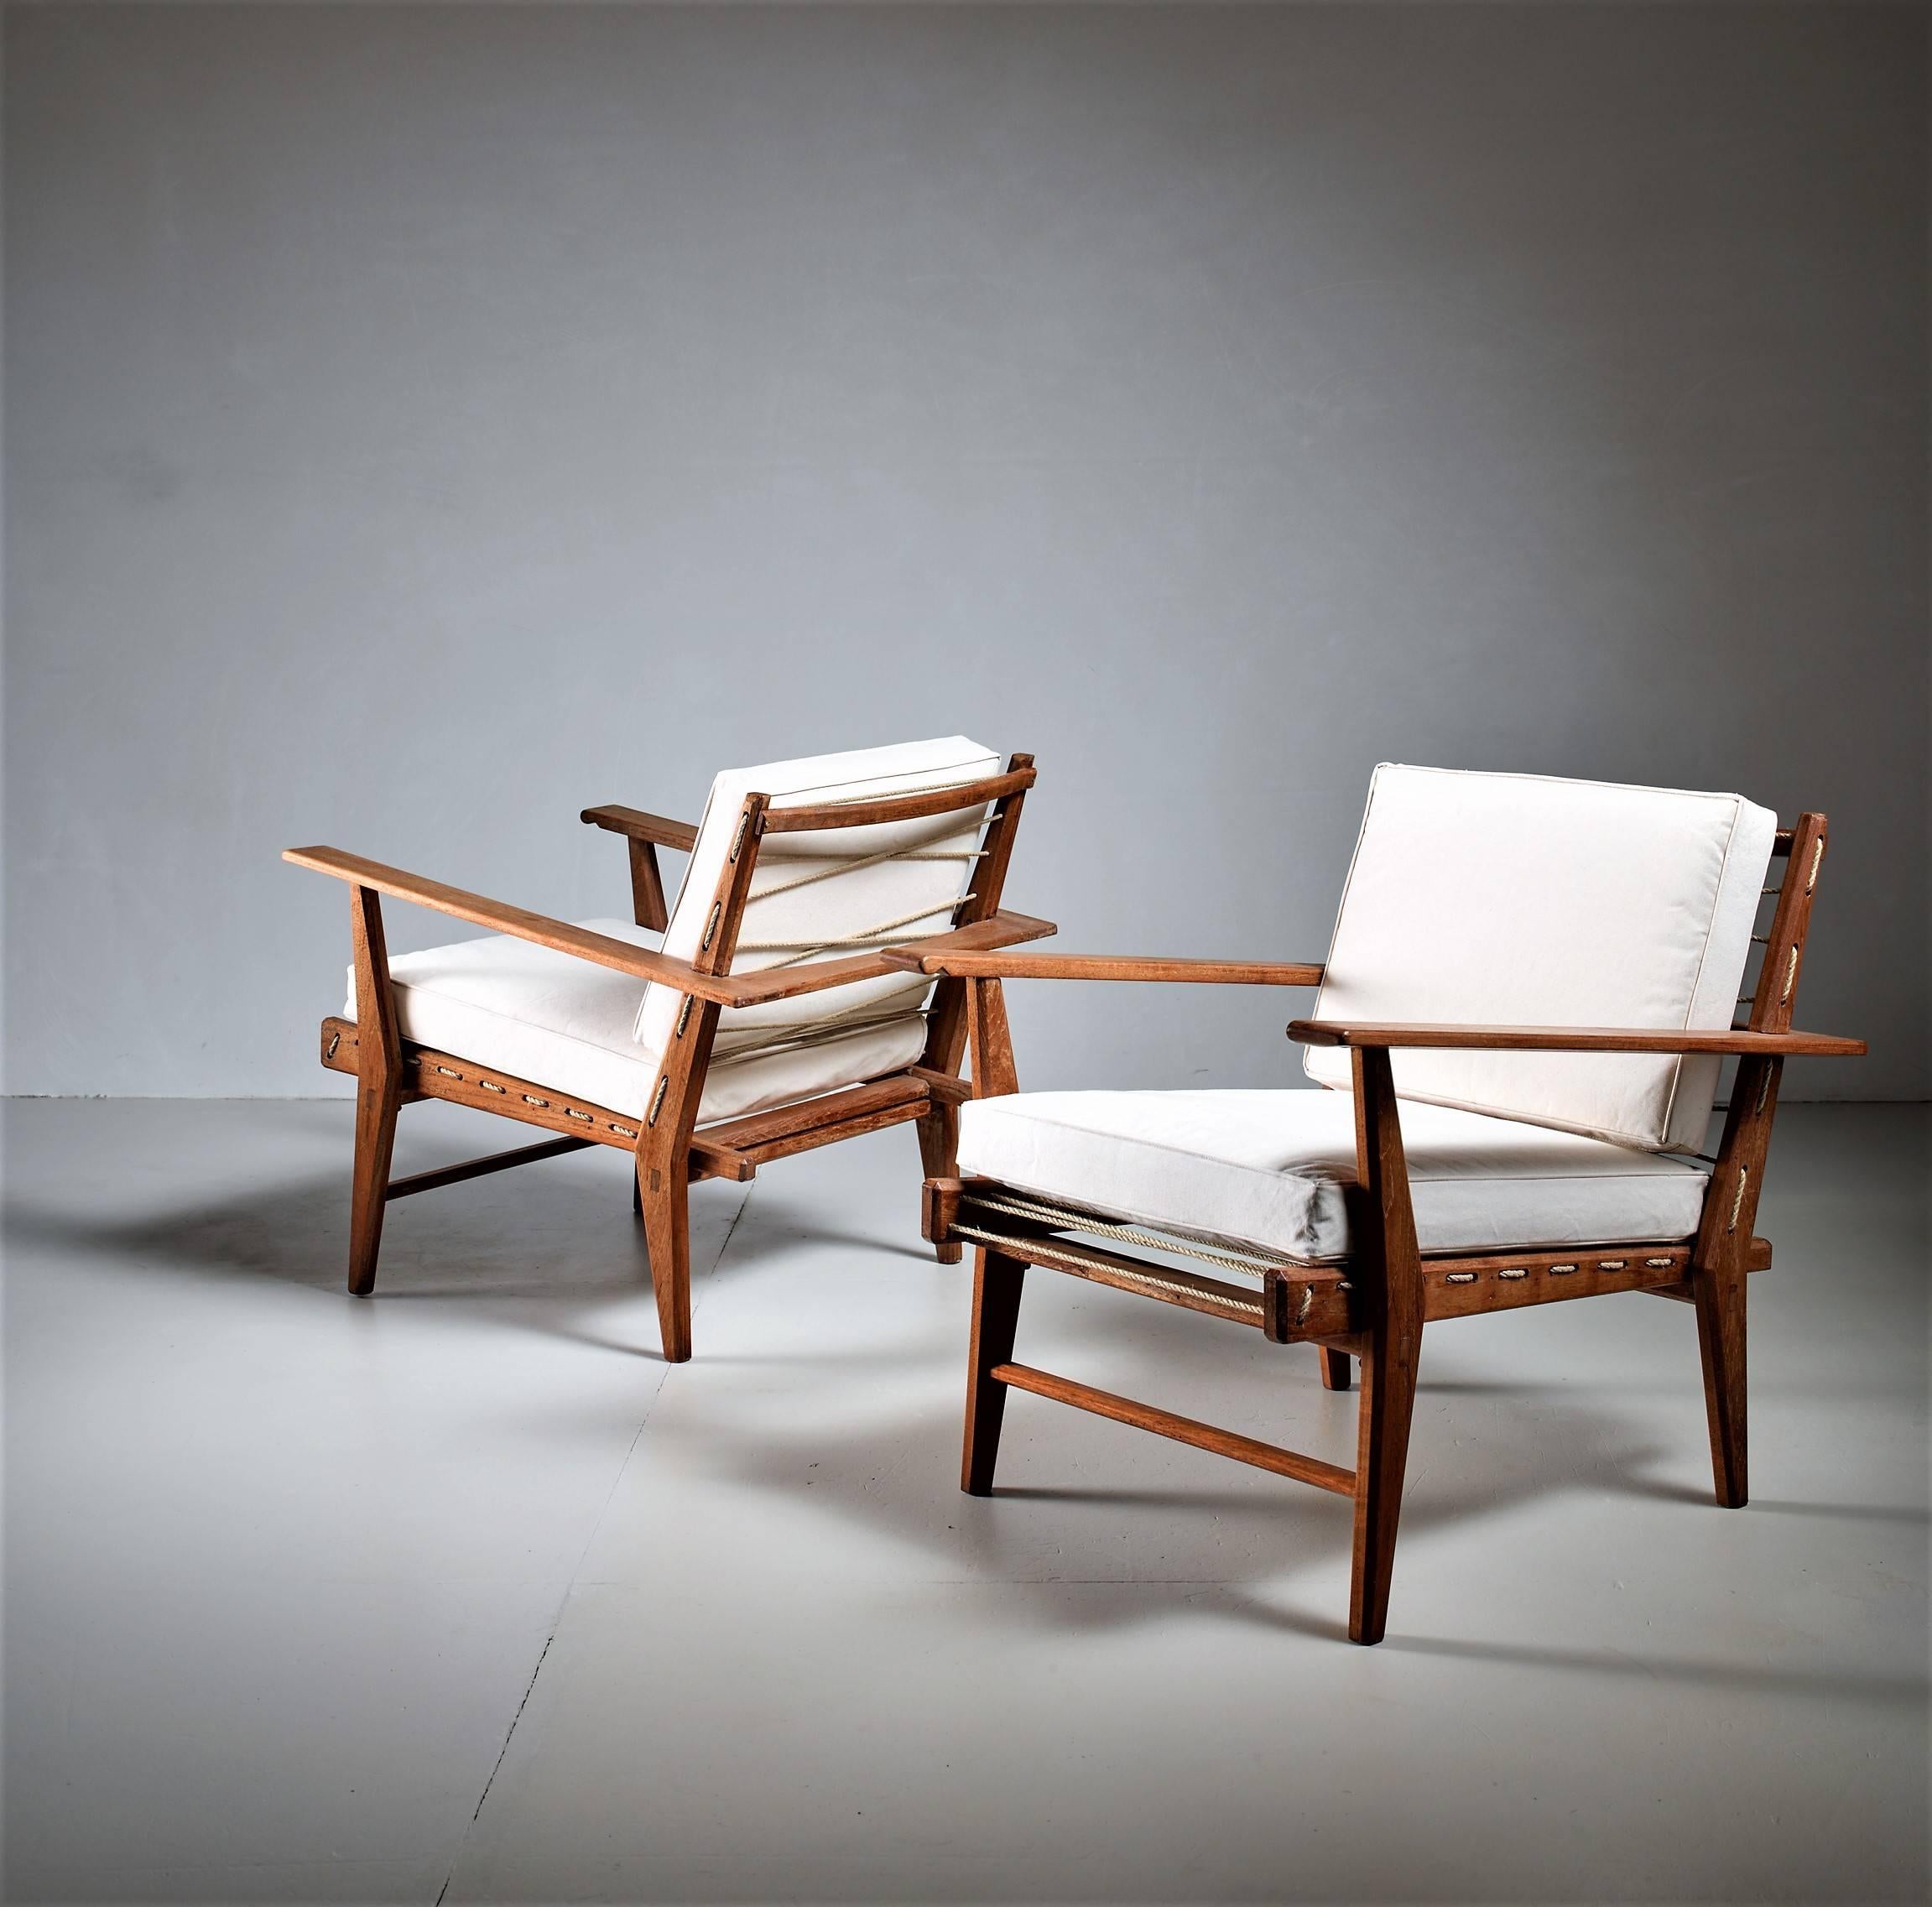 A gorgeous pair of rope chairs, along the lines of Franco Albini or Paolo Tilche. The chairs have off-white canvas cushions, resting on hemp rope.
They are beautifully made and the rope connection at the sides gives an elegant touch. The cushions